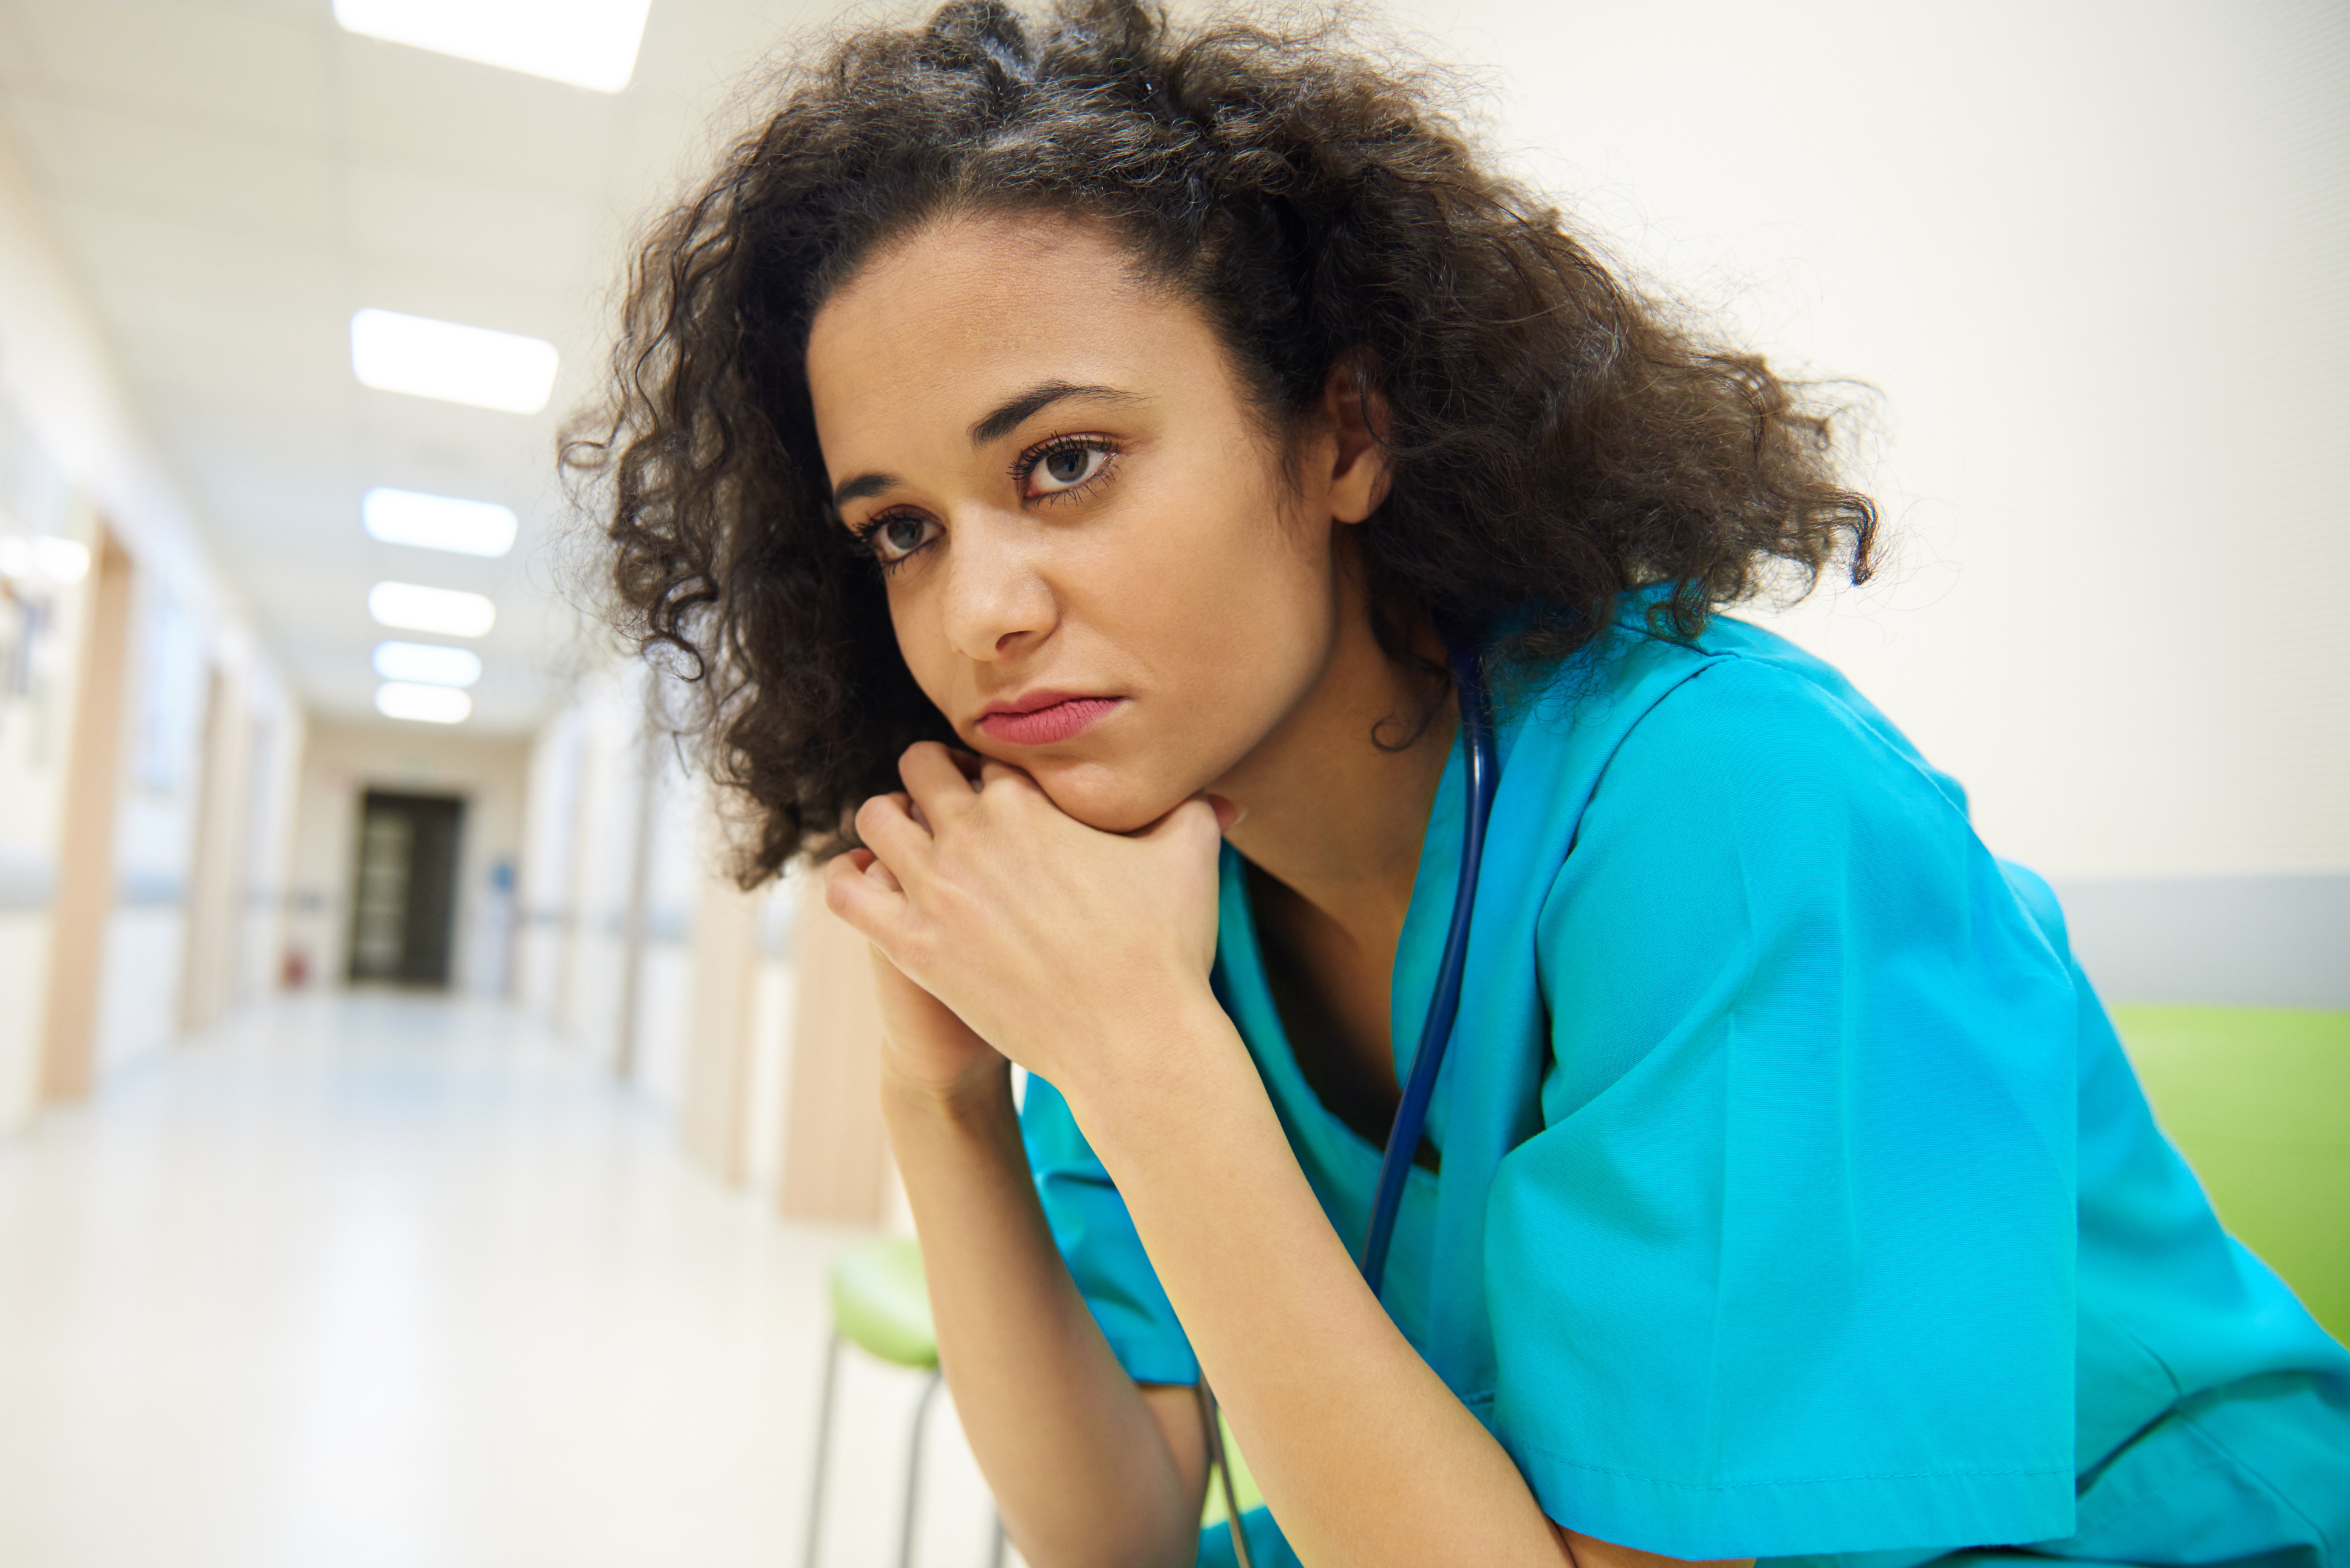 Clinician sits in hallway, frustrated with workflows and experiencing burnout